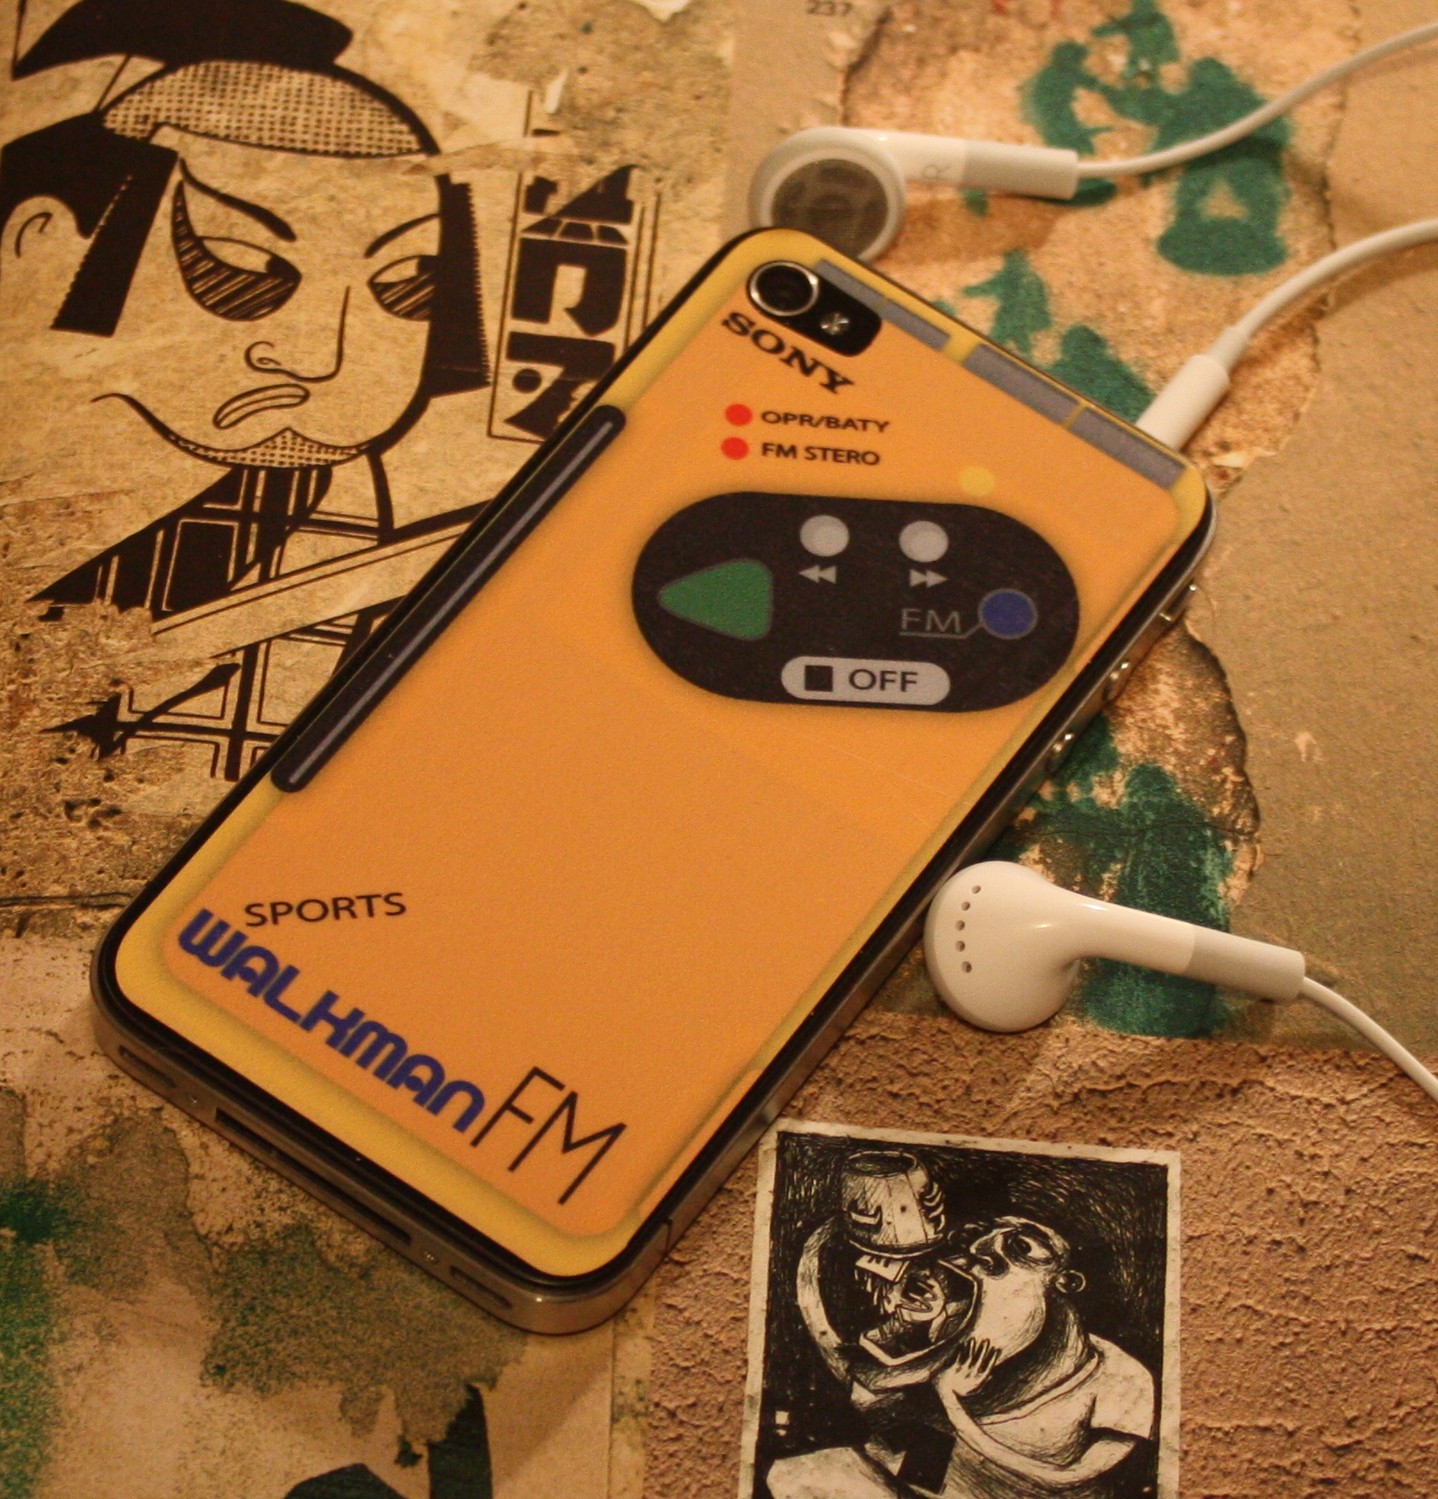 Don’t Let The Sony Walkman Die – Freestyle Your iPhone 4!